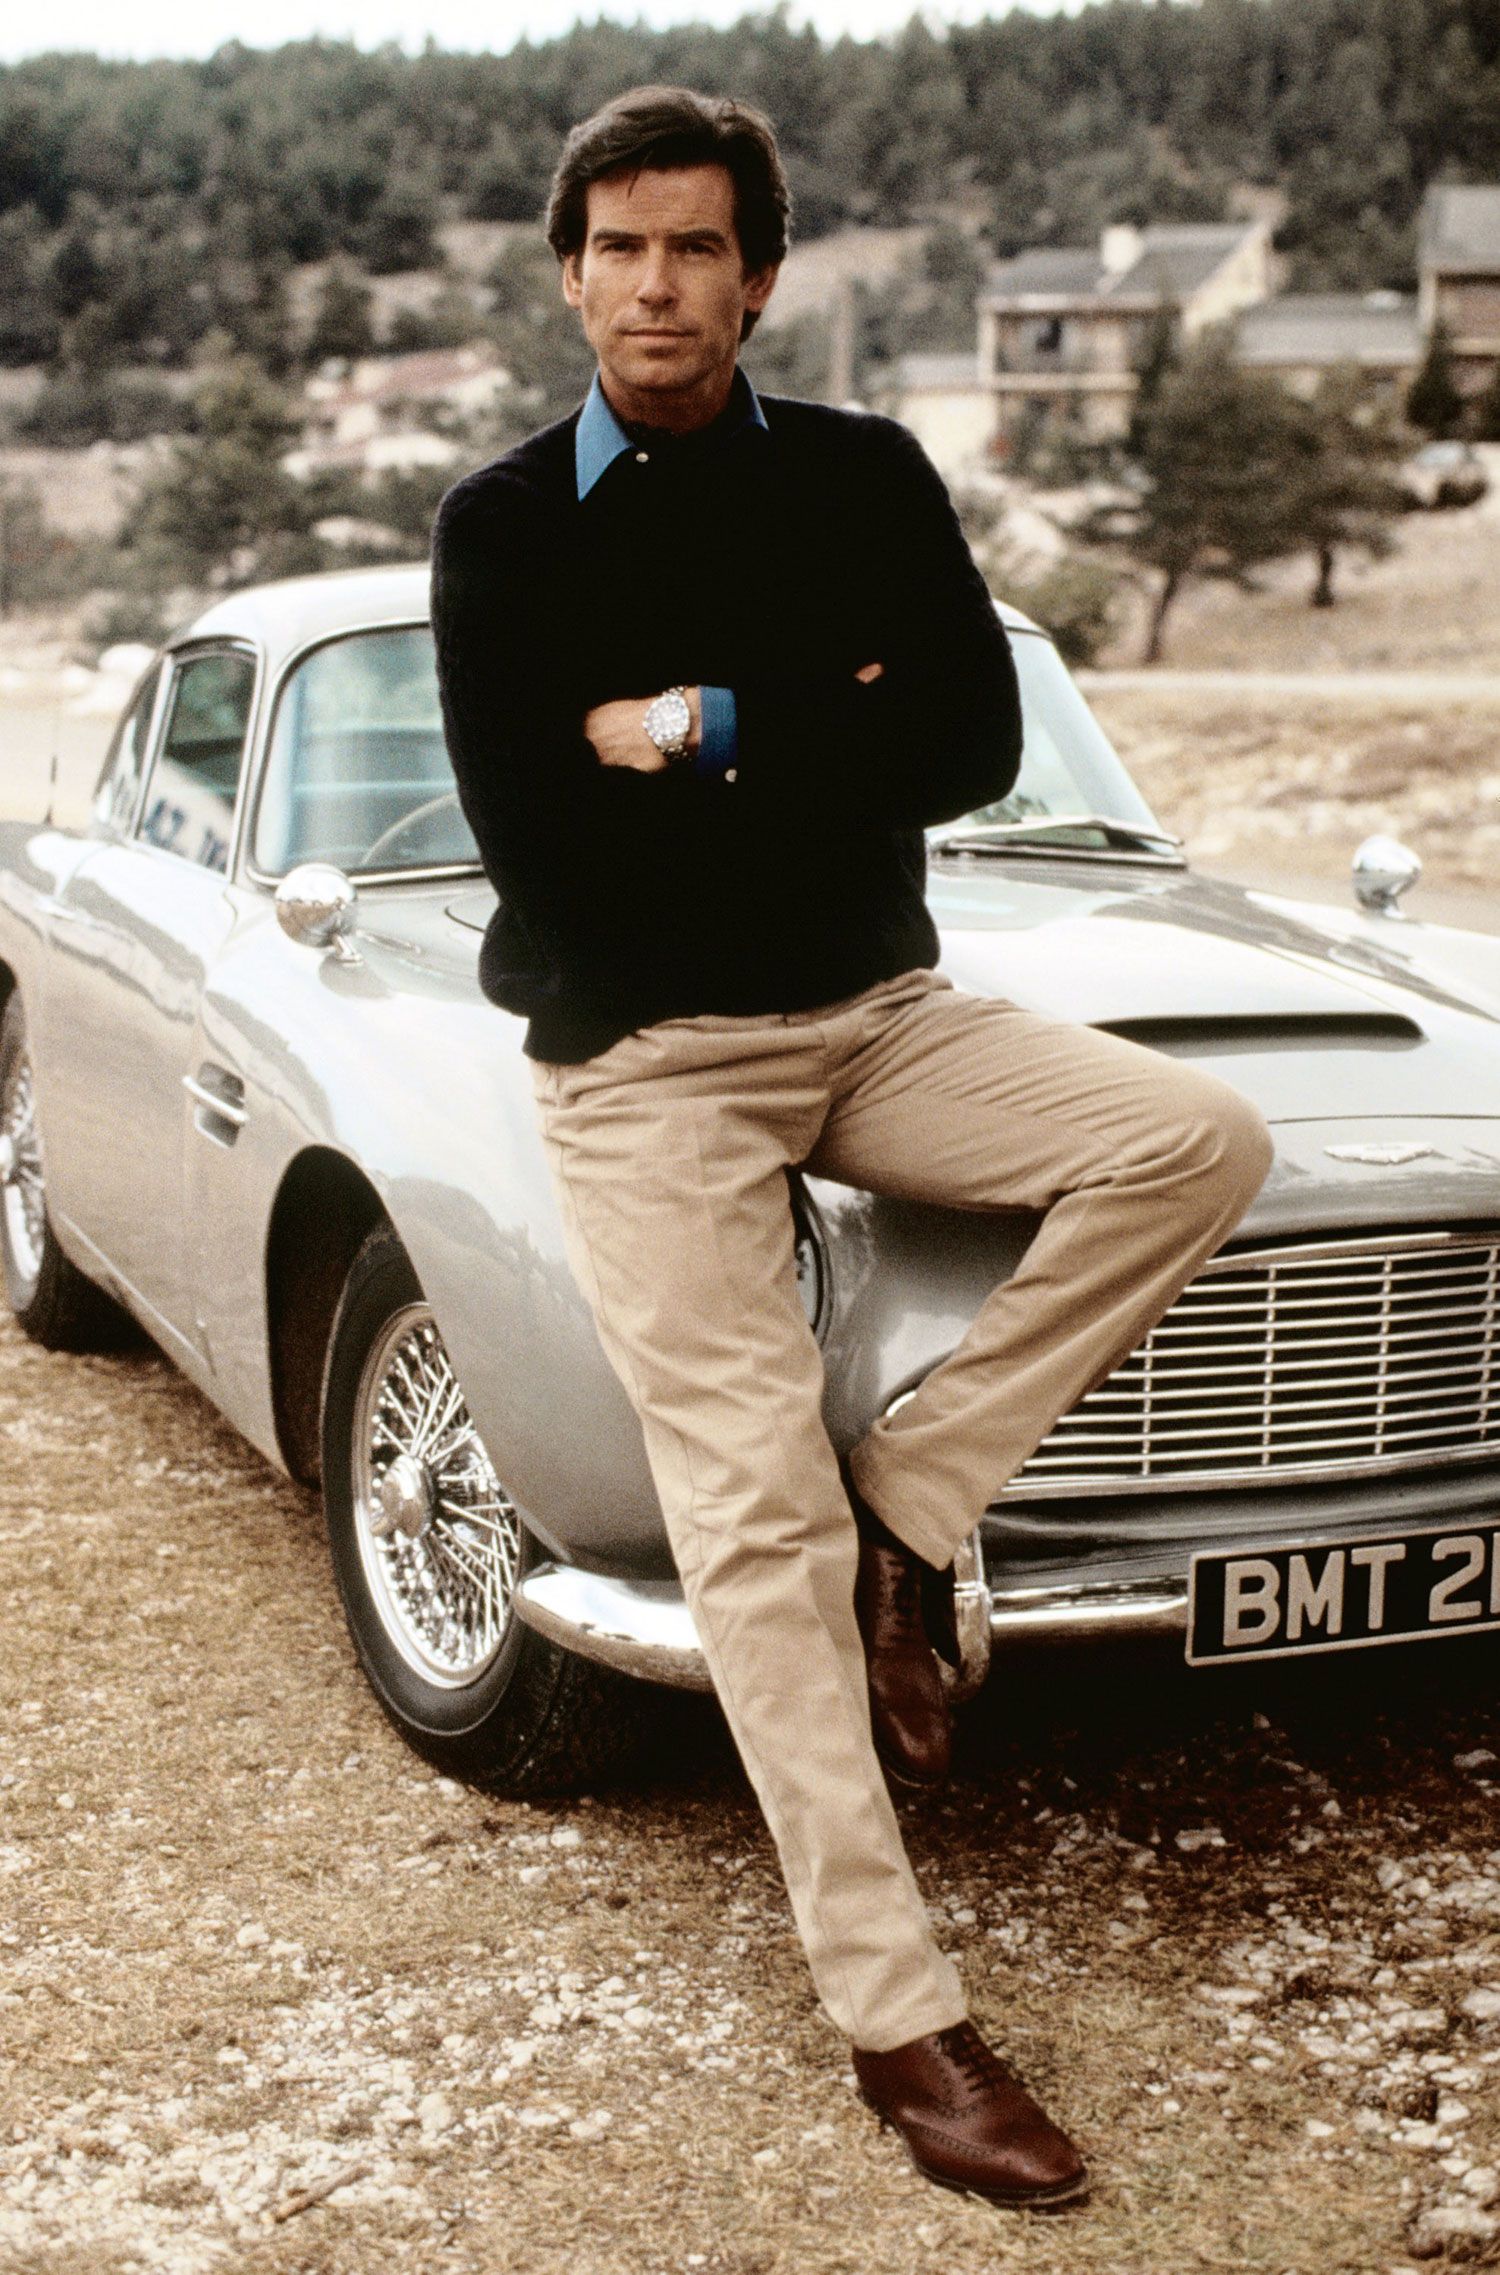 Goldeneye (1995) – Aston Martin DB5 - The Driver: An Irishman! Pierce Brosnan’s nervous debut gave us a very handsome, albeit quite stiff, Bond. His stunts (hijacking a free-falling plane to safety) were excellent, though.The Car: One of the best uses of the DB5 in the whole series: racing a Famke Janssen-driven Ferrari F355 down 2-lane Italian switchbacks. Chalk the ability of a 1964 Aston to stay abreast of a 1995 Ferrari up to movie magic; in reality, they aren’t even close.The Evolutionary Leap: The franchise’s achievement of balance: young star, old car, and just enough old chestnuts (“Let’s make the investigation quite thorough,” from Bond to his psychologist) to keep fans happy.